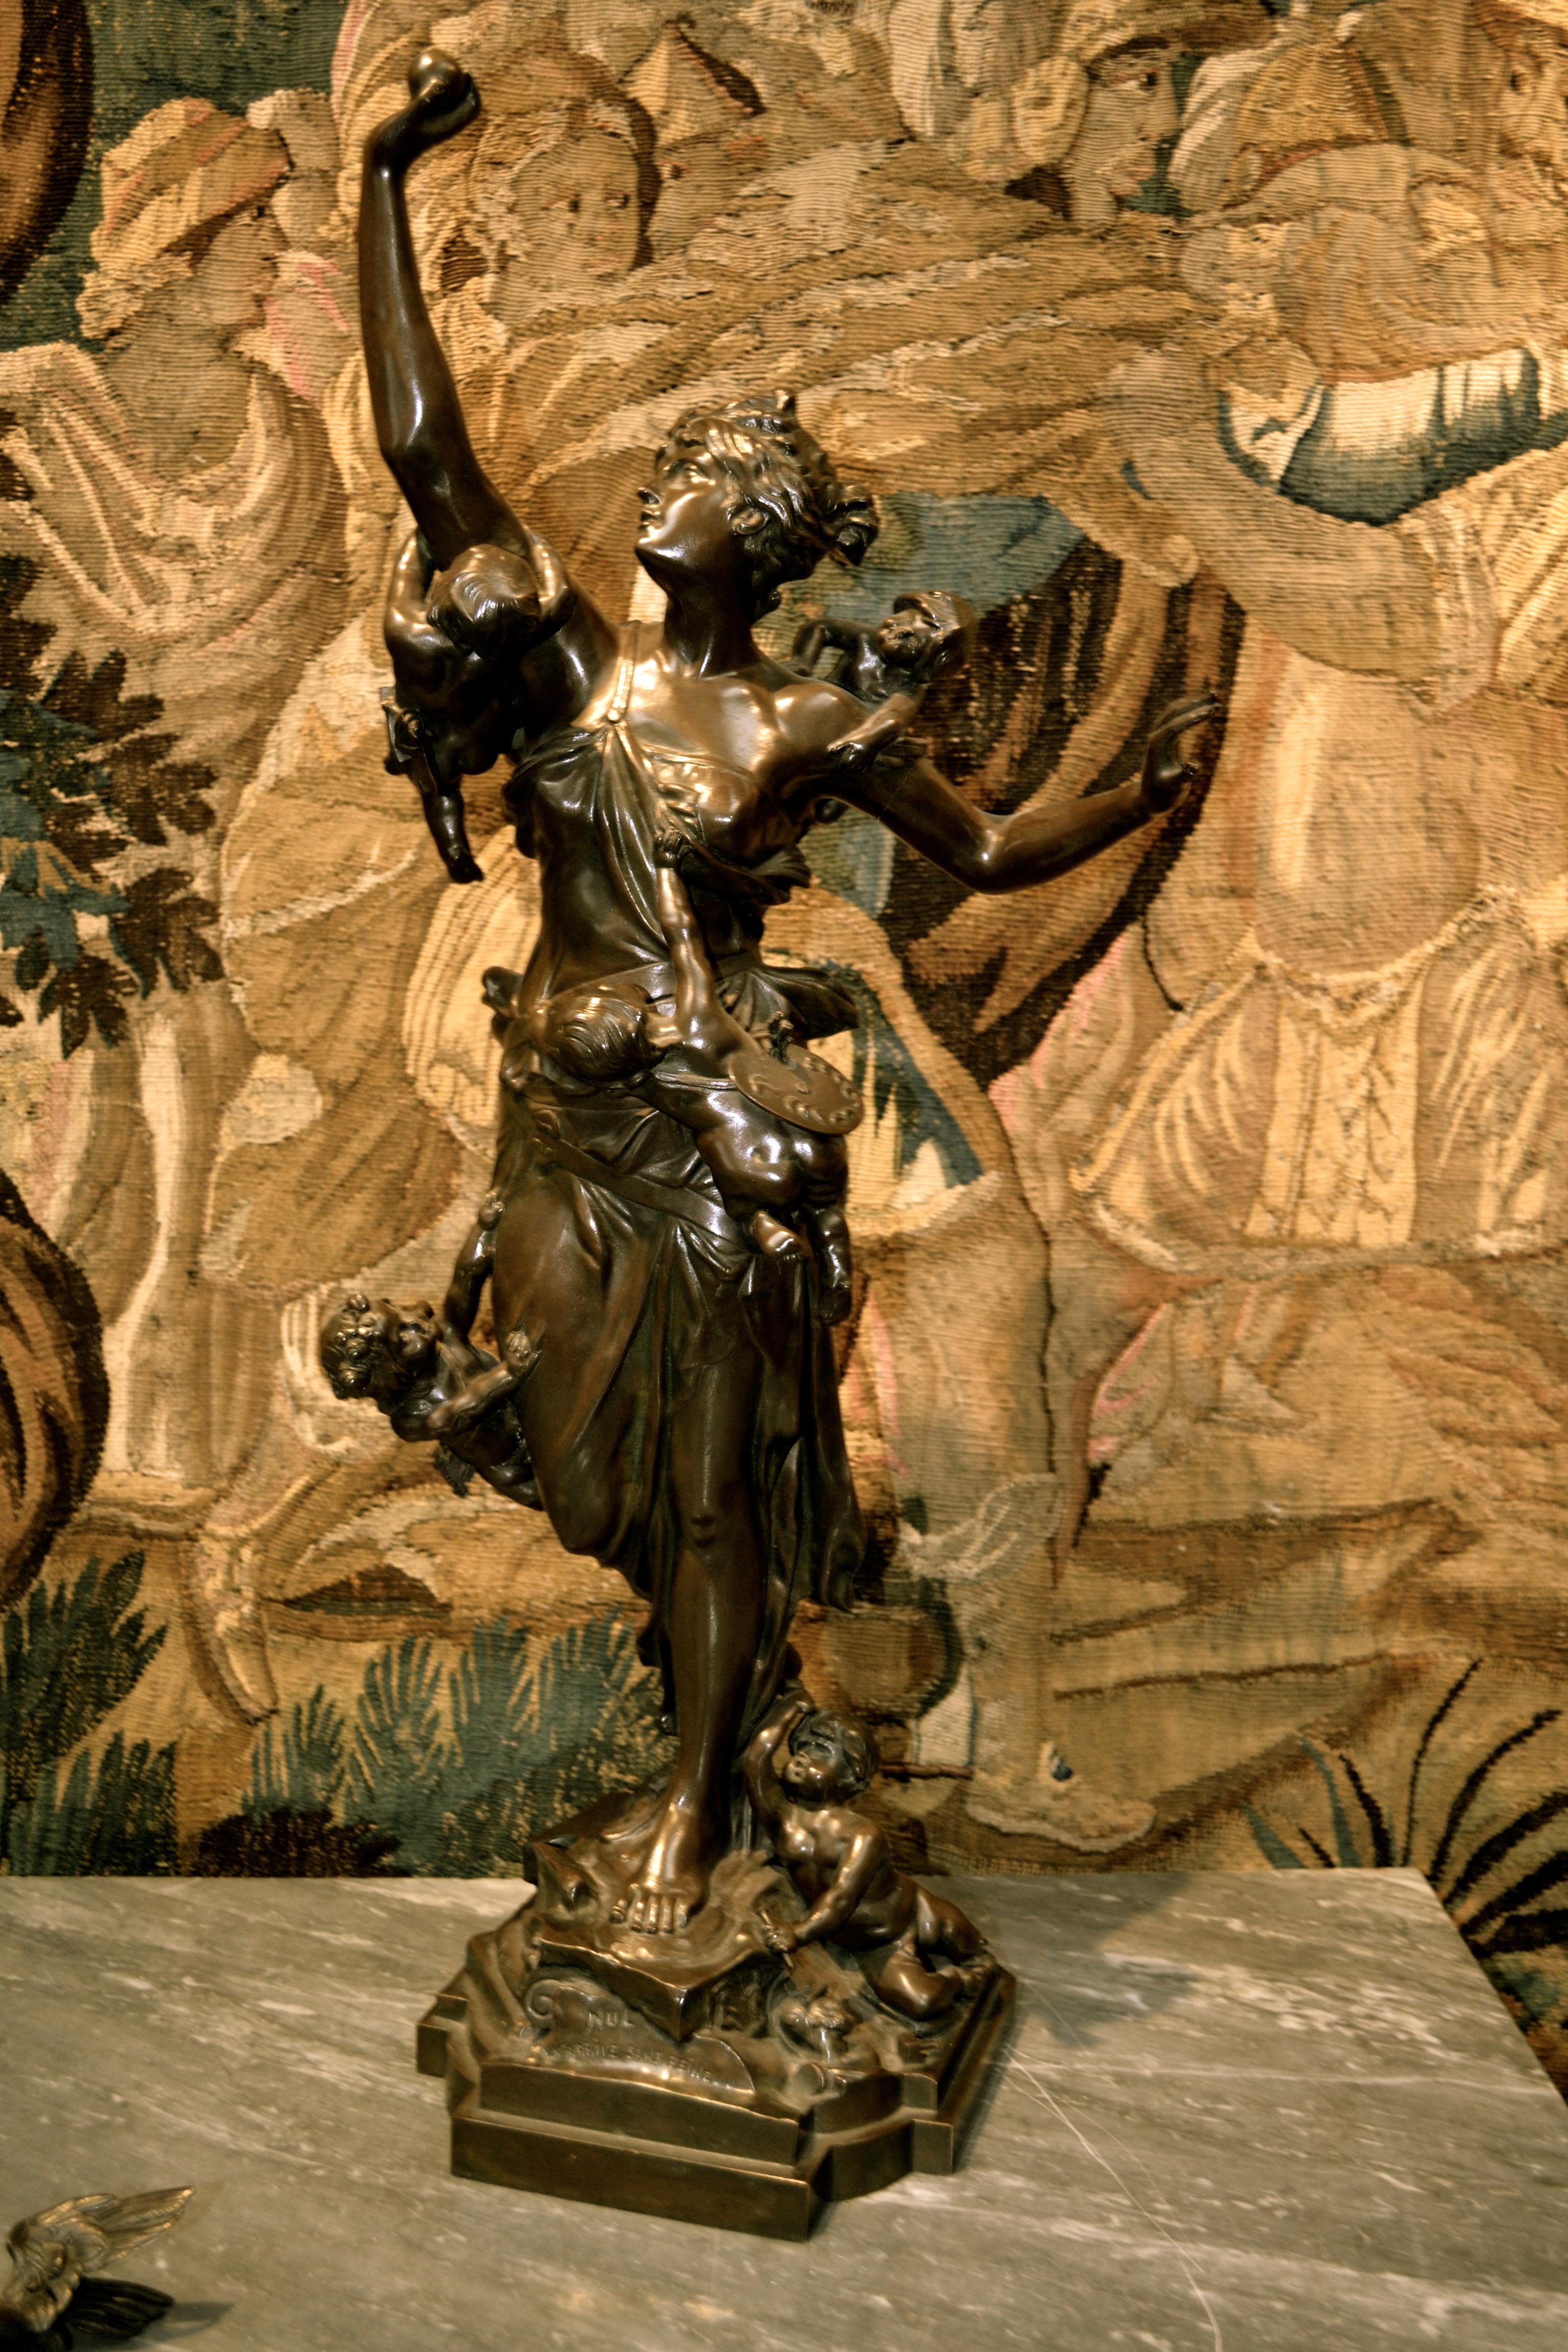 An inspiring bronze statue by Belgian mid-19 century Sculptur Auguste De Wever, (1836-1884), titled ” Nul N’arrive sans peine” meaning “Nothing comes without sacrifice” This life lesson is depicted as a classically draped maiden holding aloft a